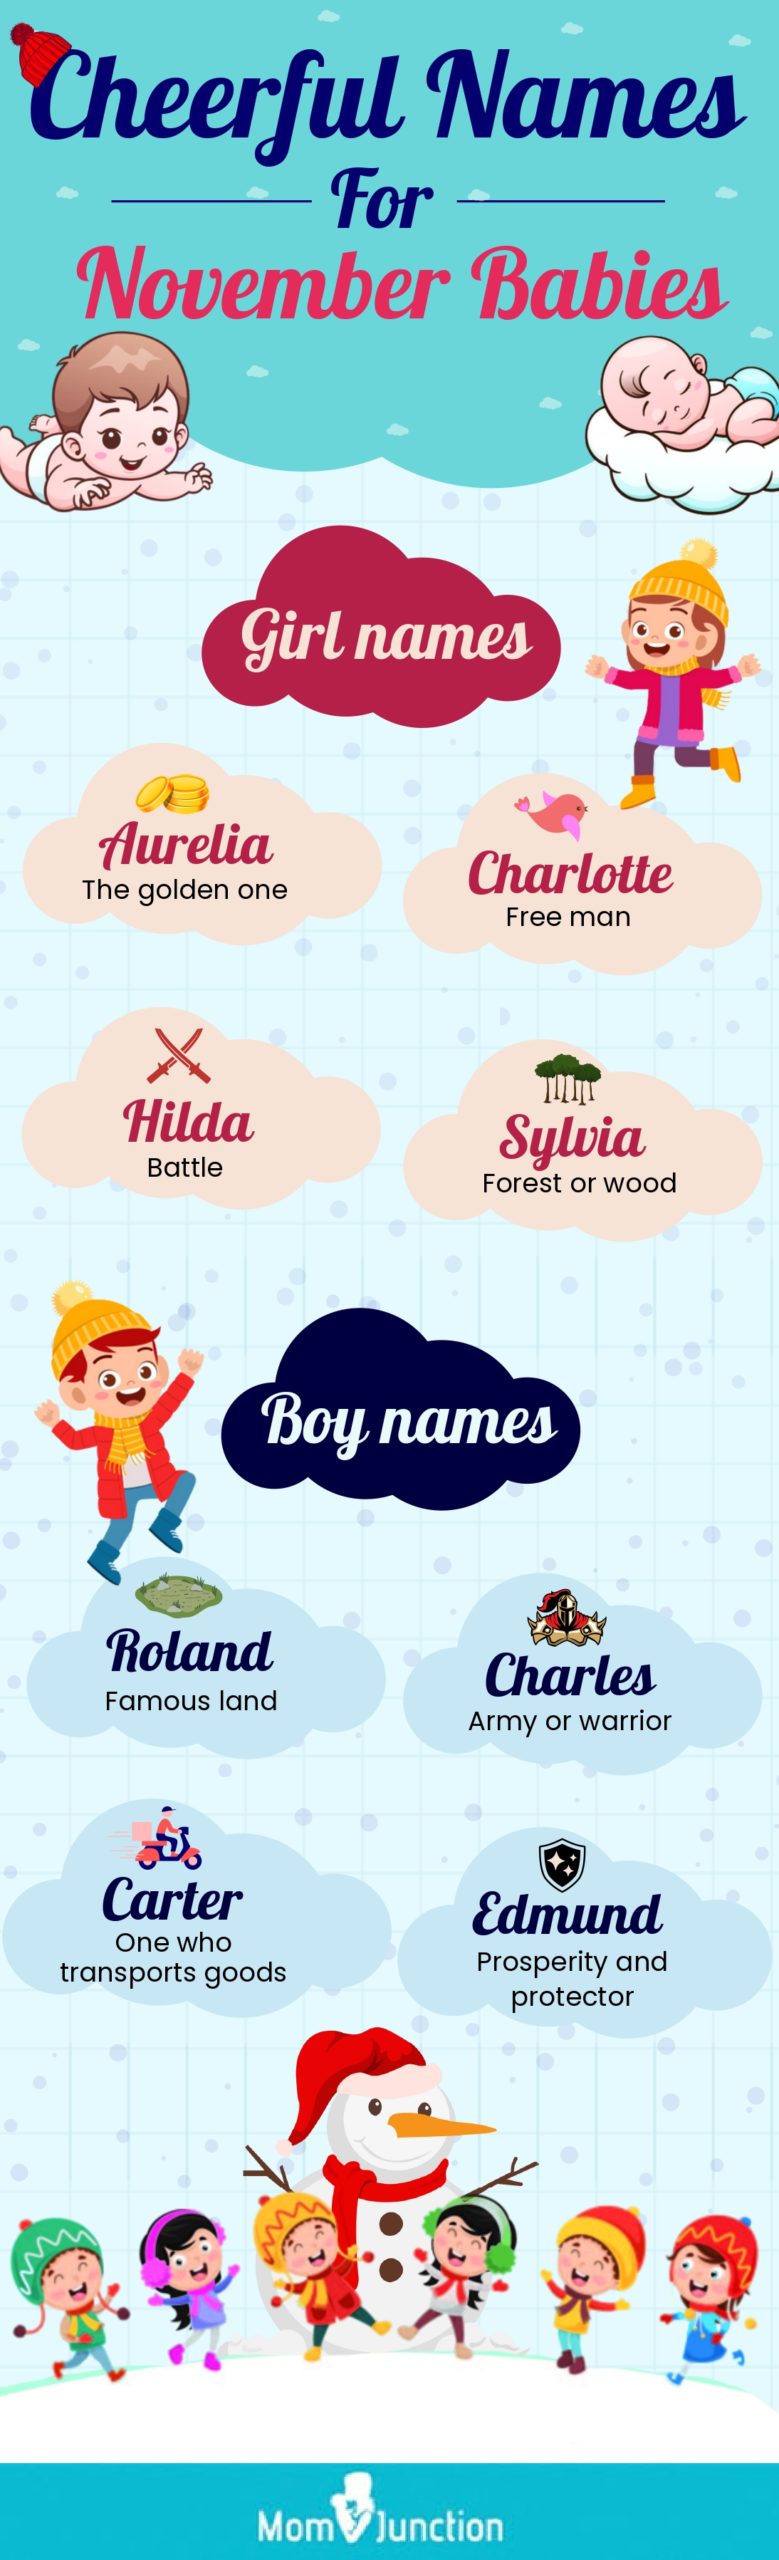 cheerful names for november babies (infographic)